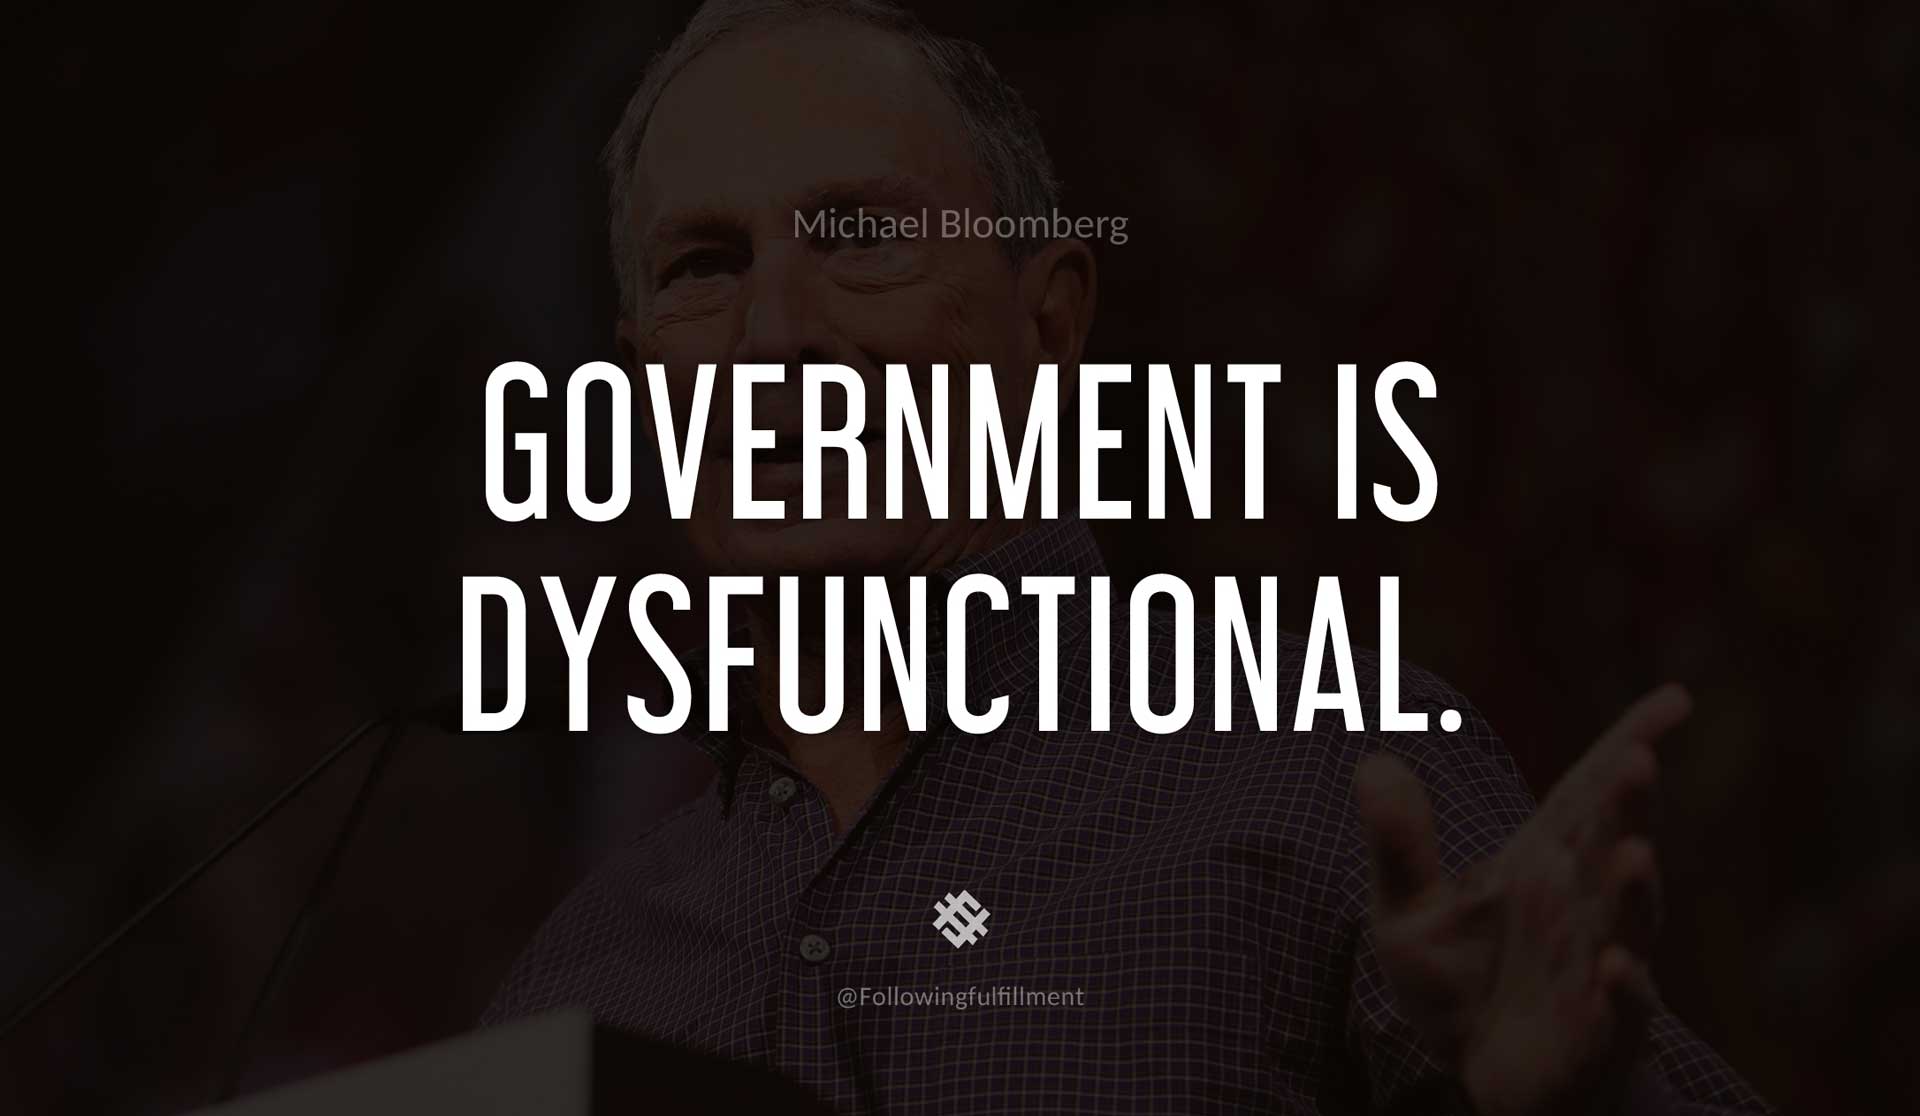 Government-is-dysfunctional.-MICHAEL-BLOOMBERG-Quote.jpg